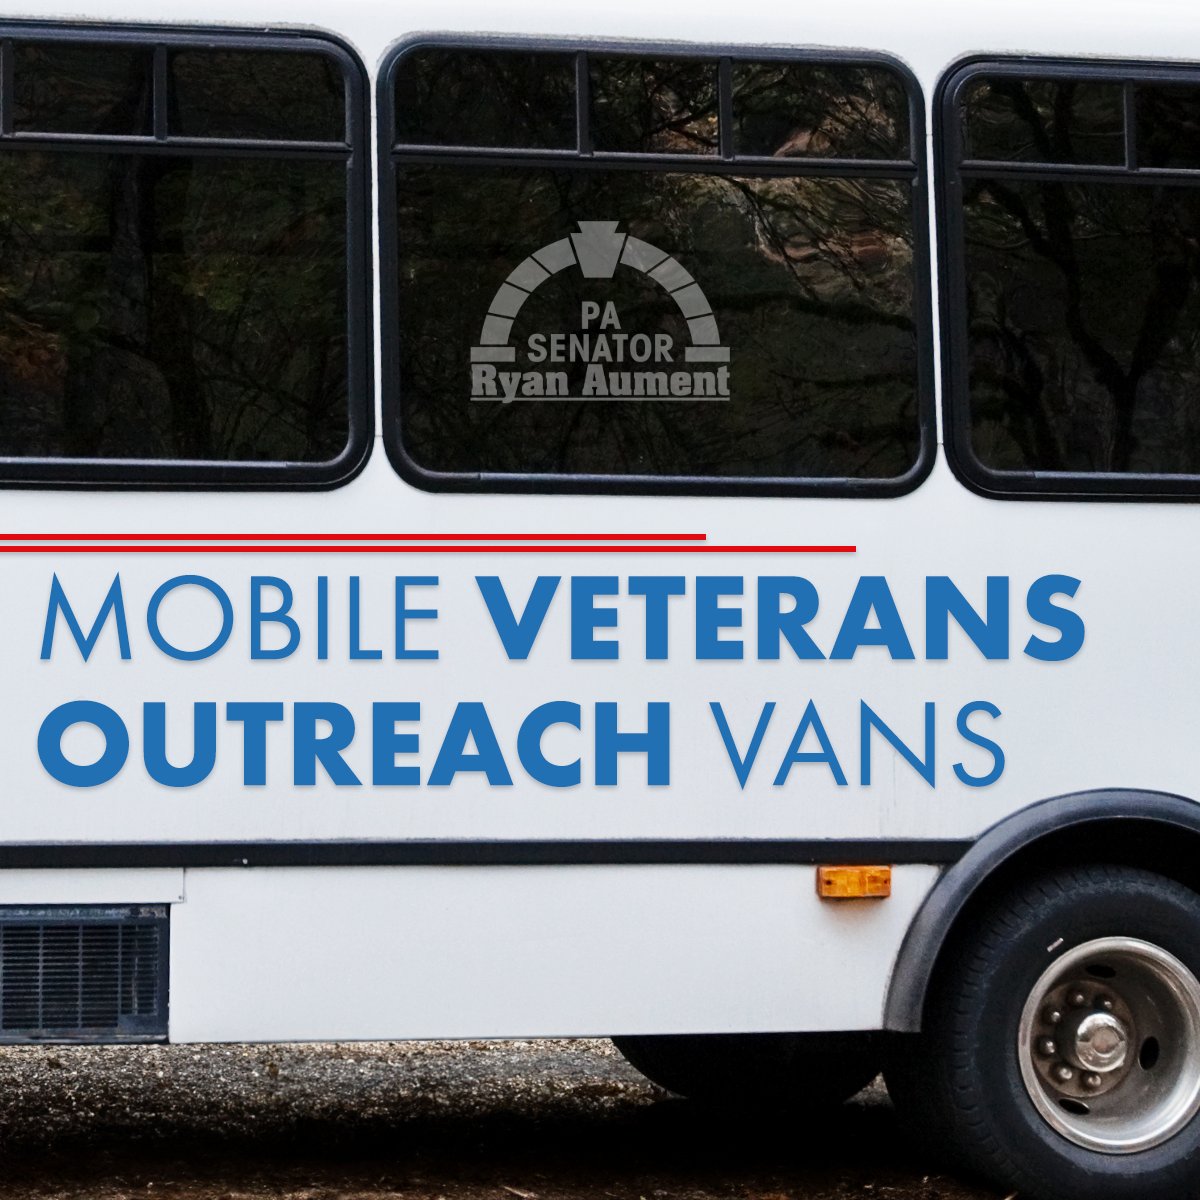 Mobile Veterans Outreach Vans are available to assist #veterans in obtaining info and initiating benefit claim paperwork 🚐 You can request a @PADMVA van for your community event: bit.ly/3YooZhv